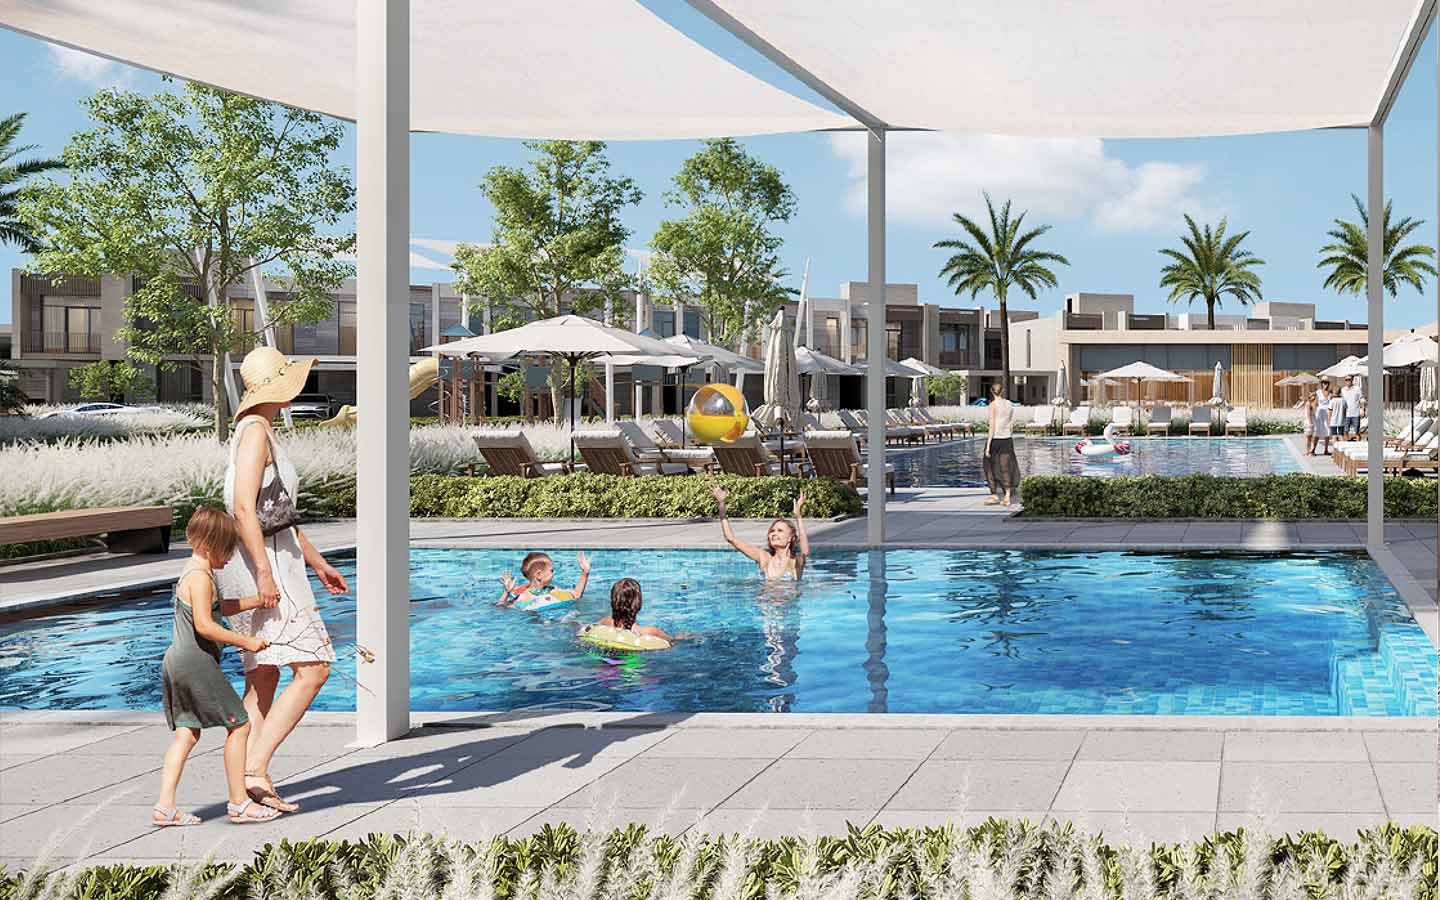 expo golf villas six has several pools and parks